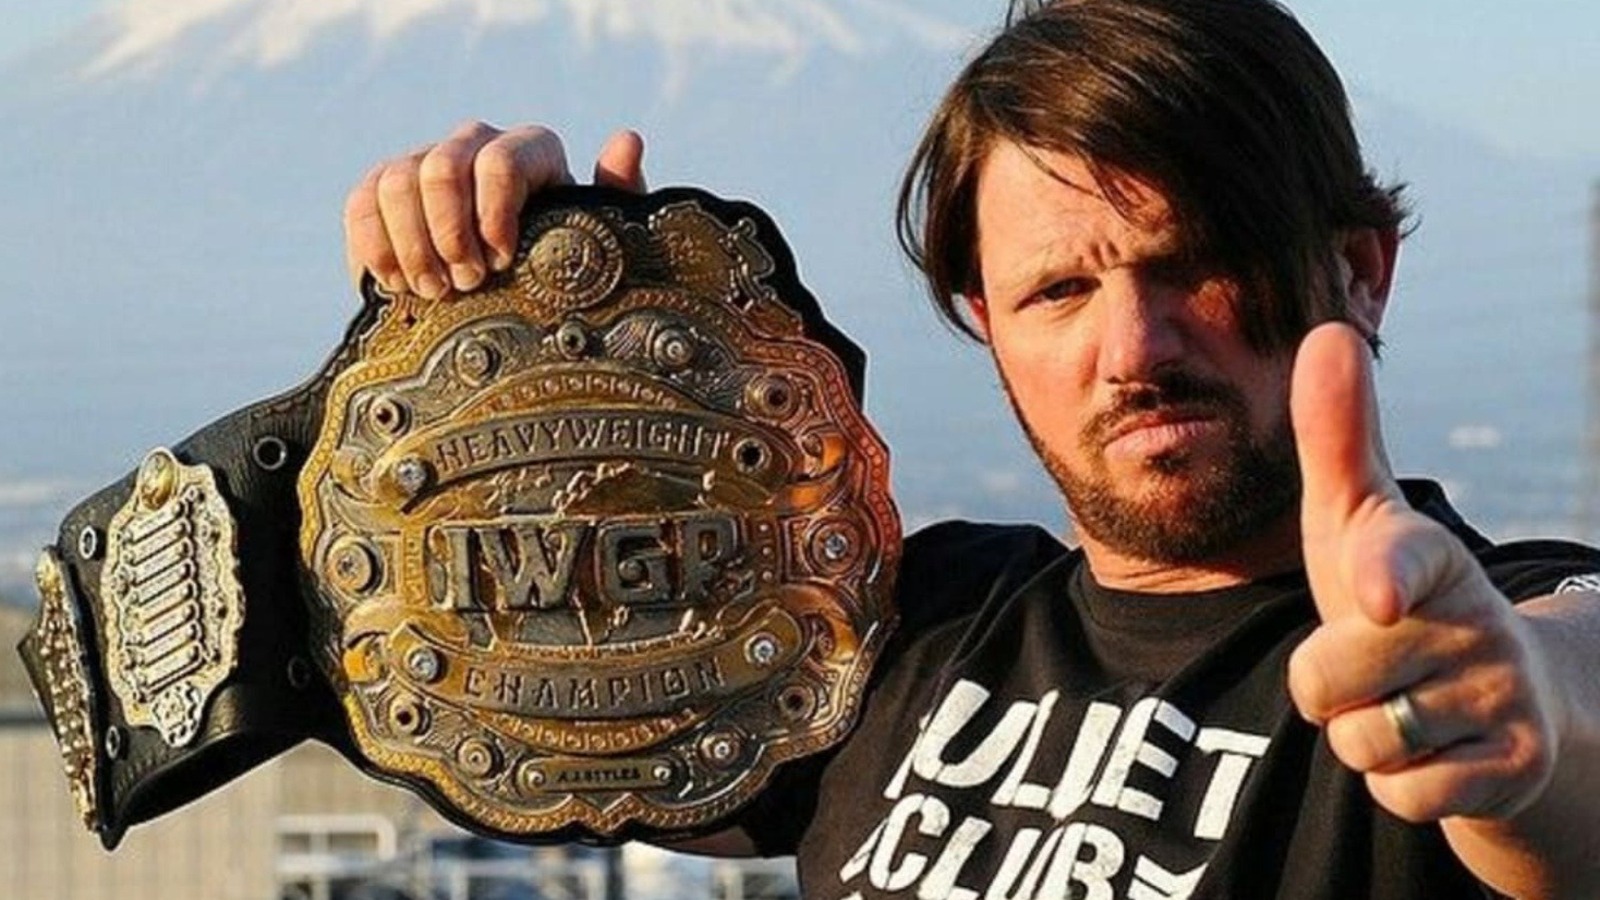 Matt Hardy evaluates WWE star AJ Styles’ time in the influential Bullet Club stable